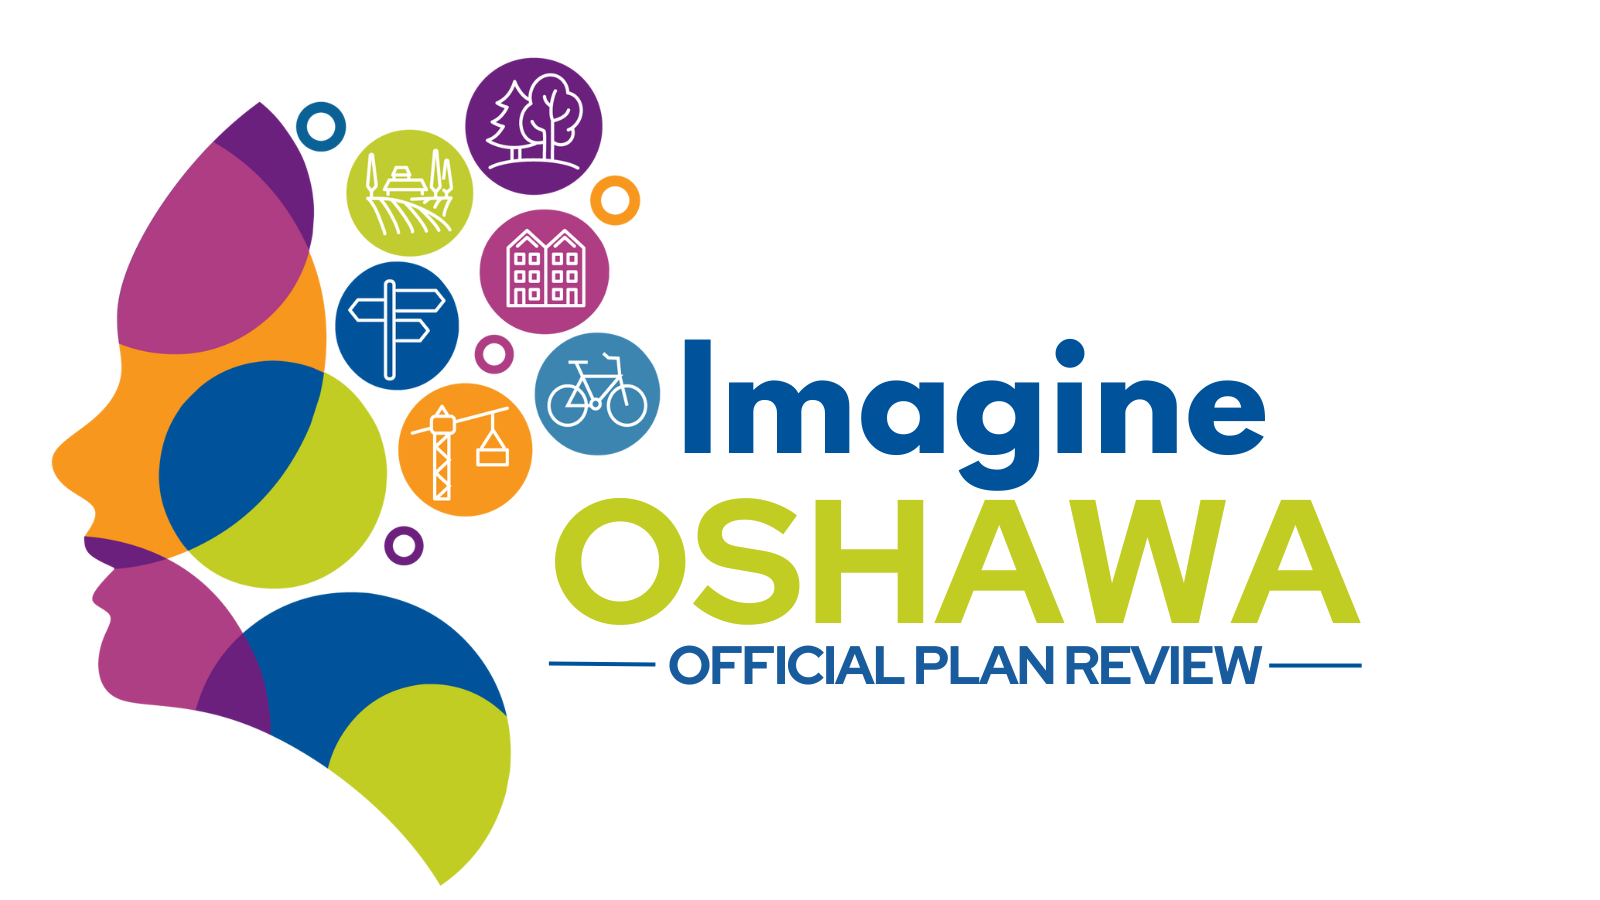 a graphic of a person with multi-coloured images and text that reads "Imagine Oshawa, Official Plan Review"